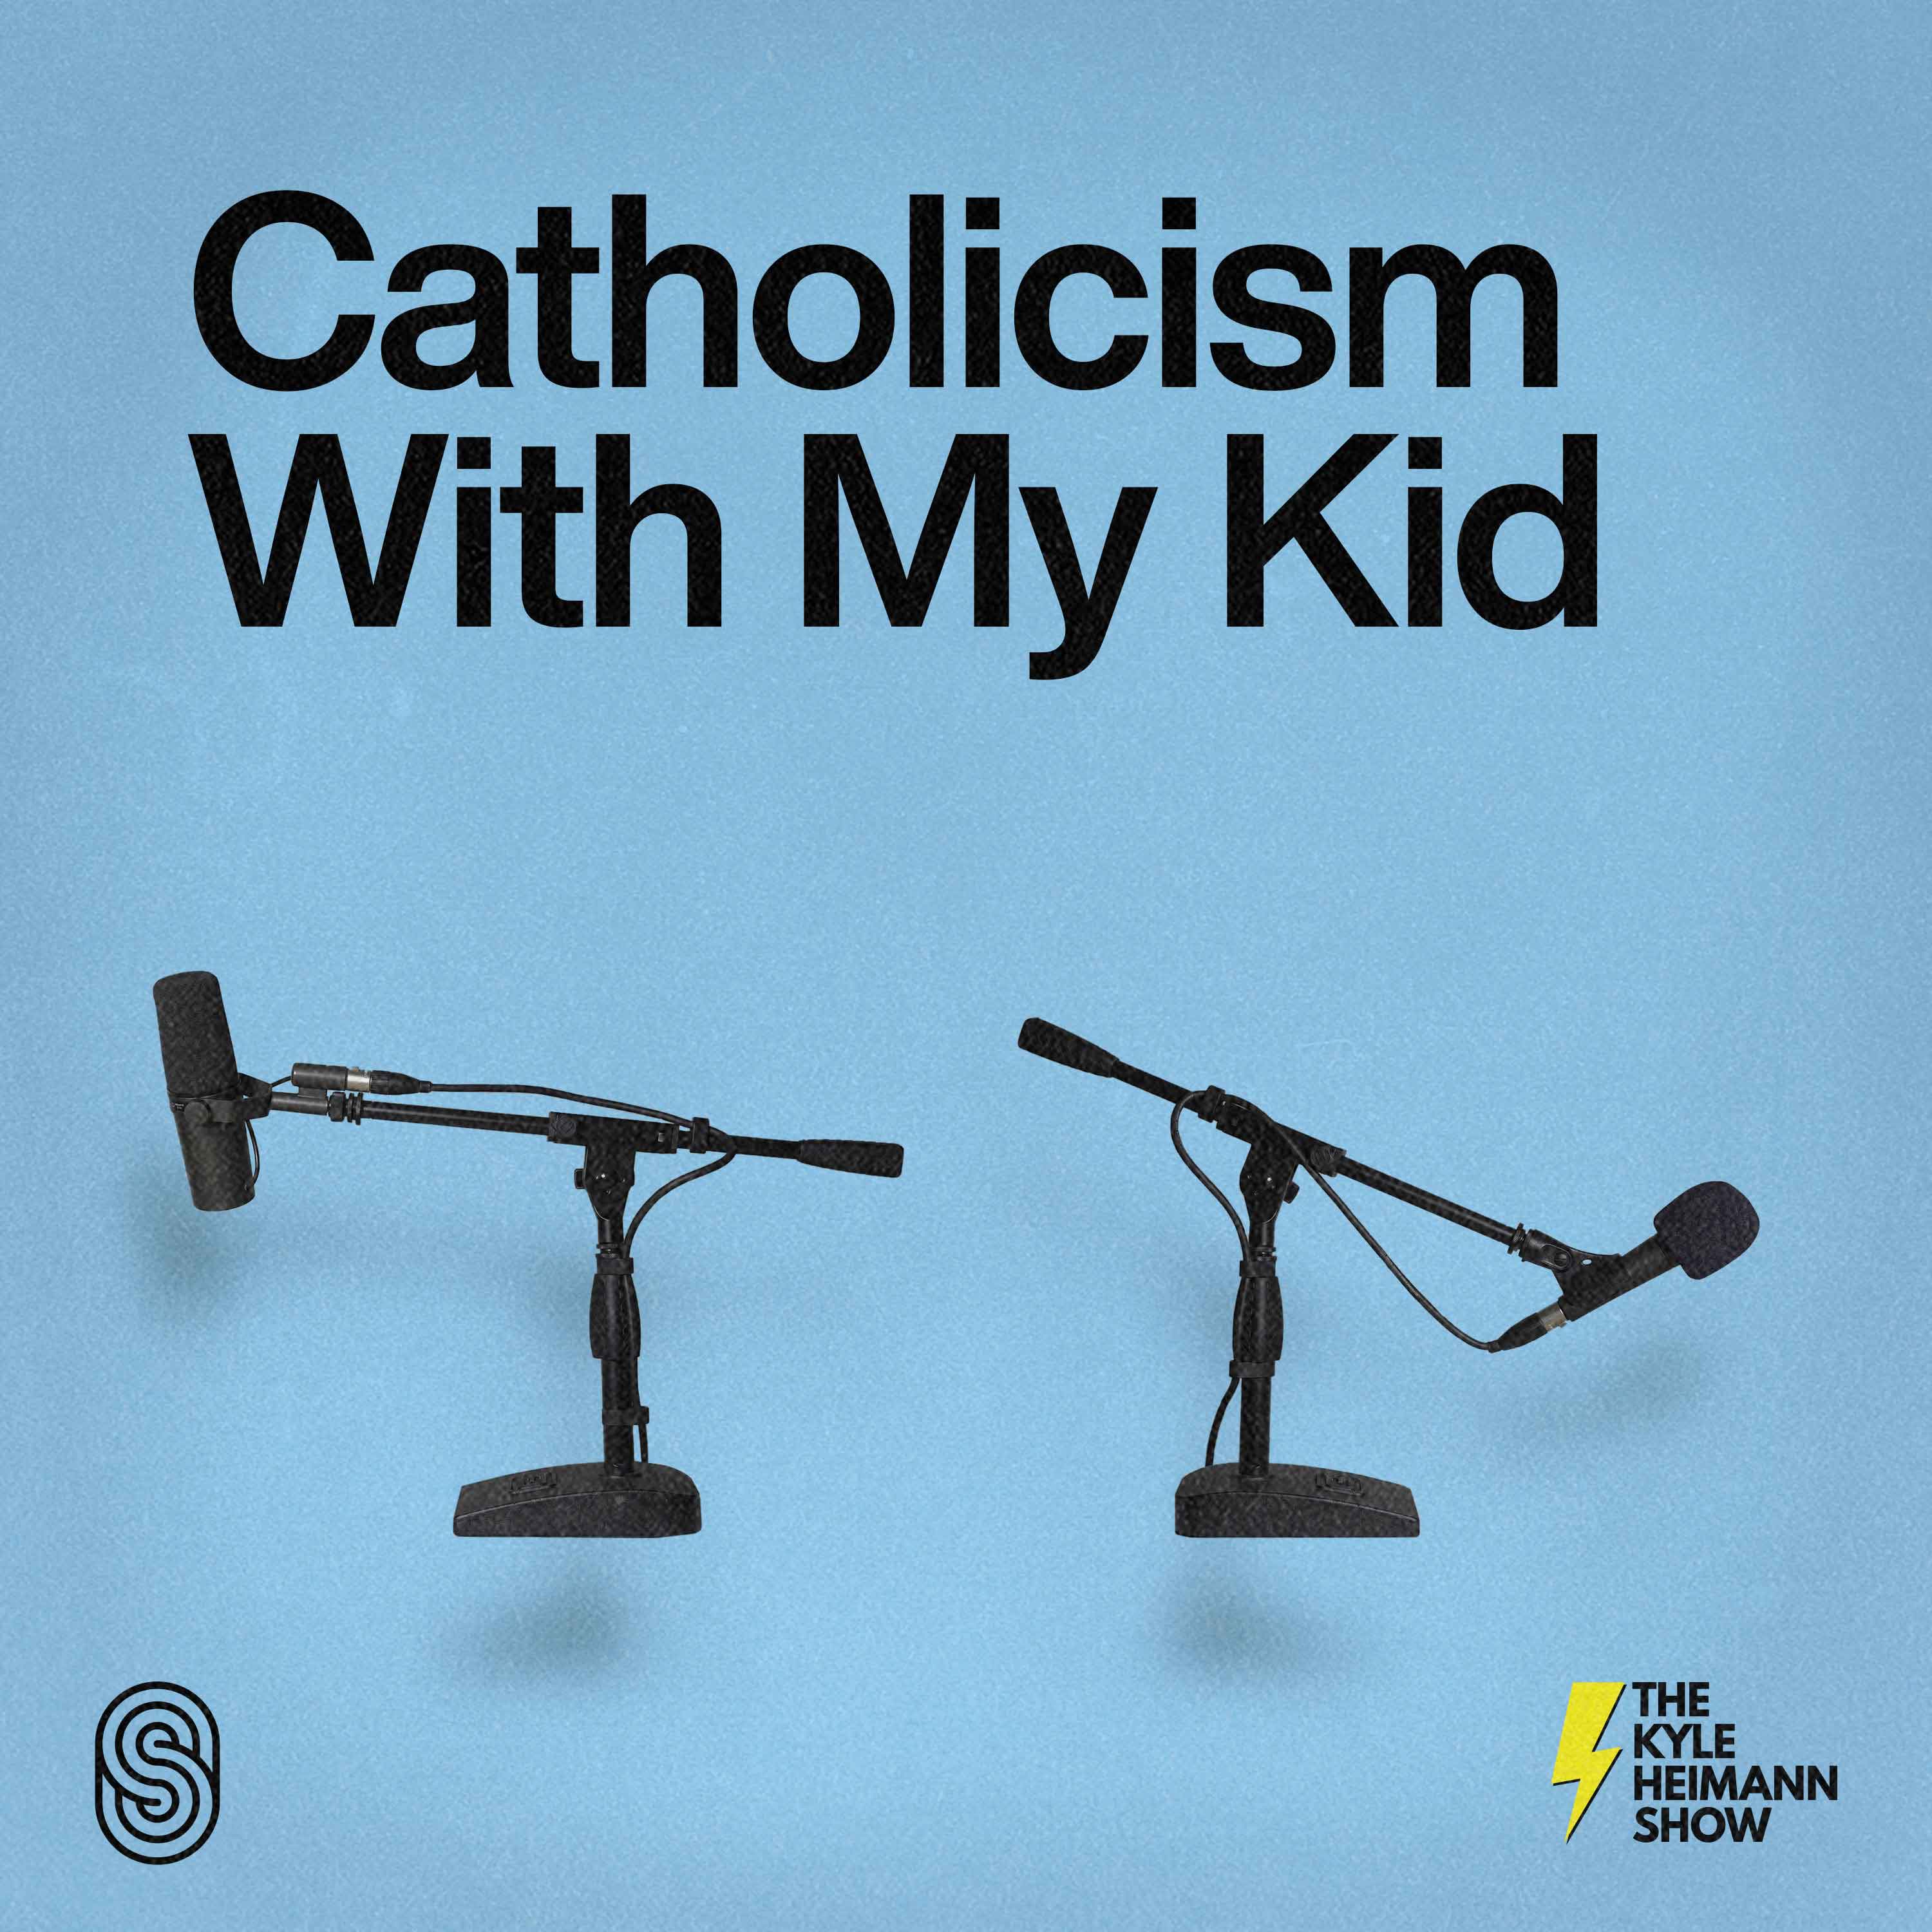 Catholicism With My Kid - The Kyle Heimann Show